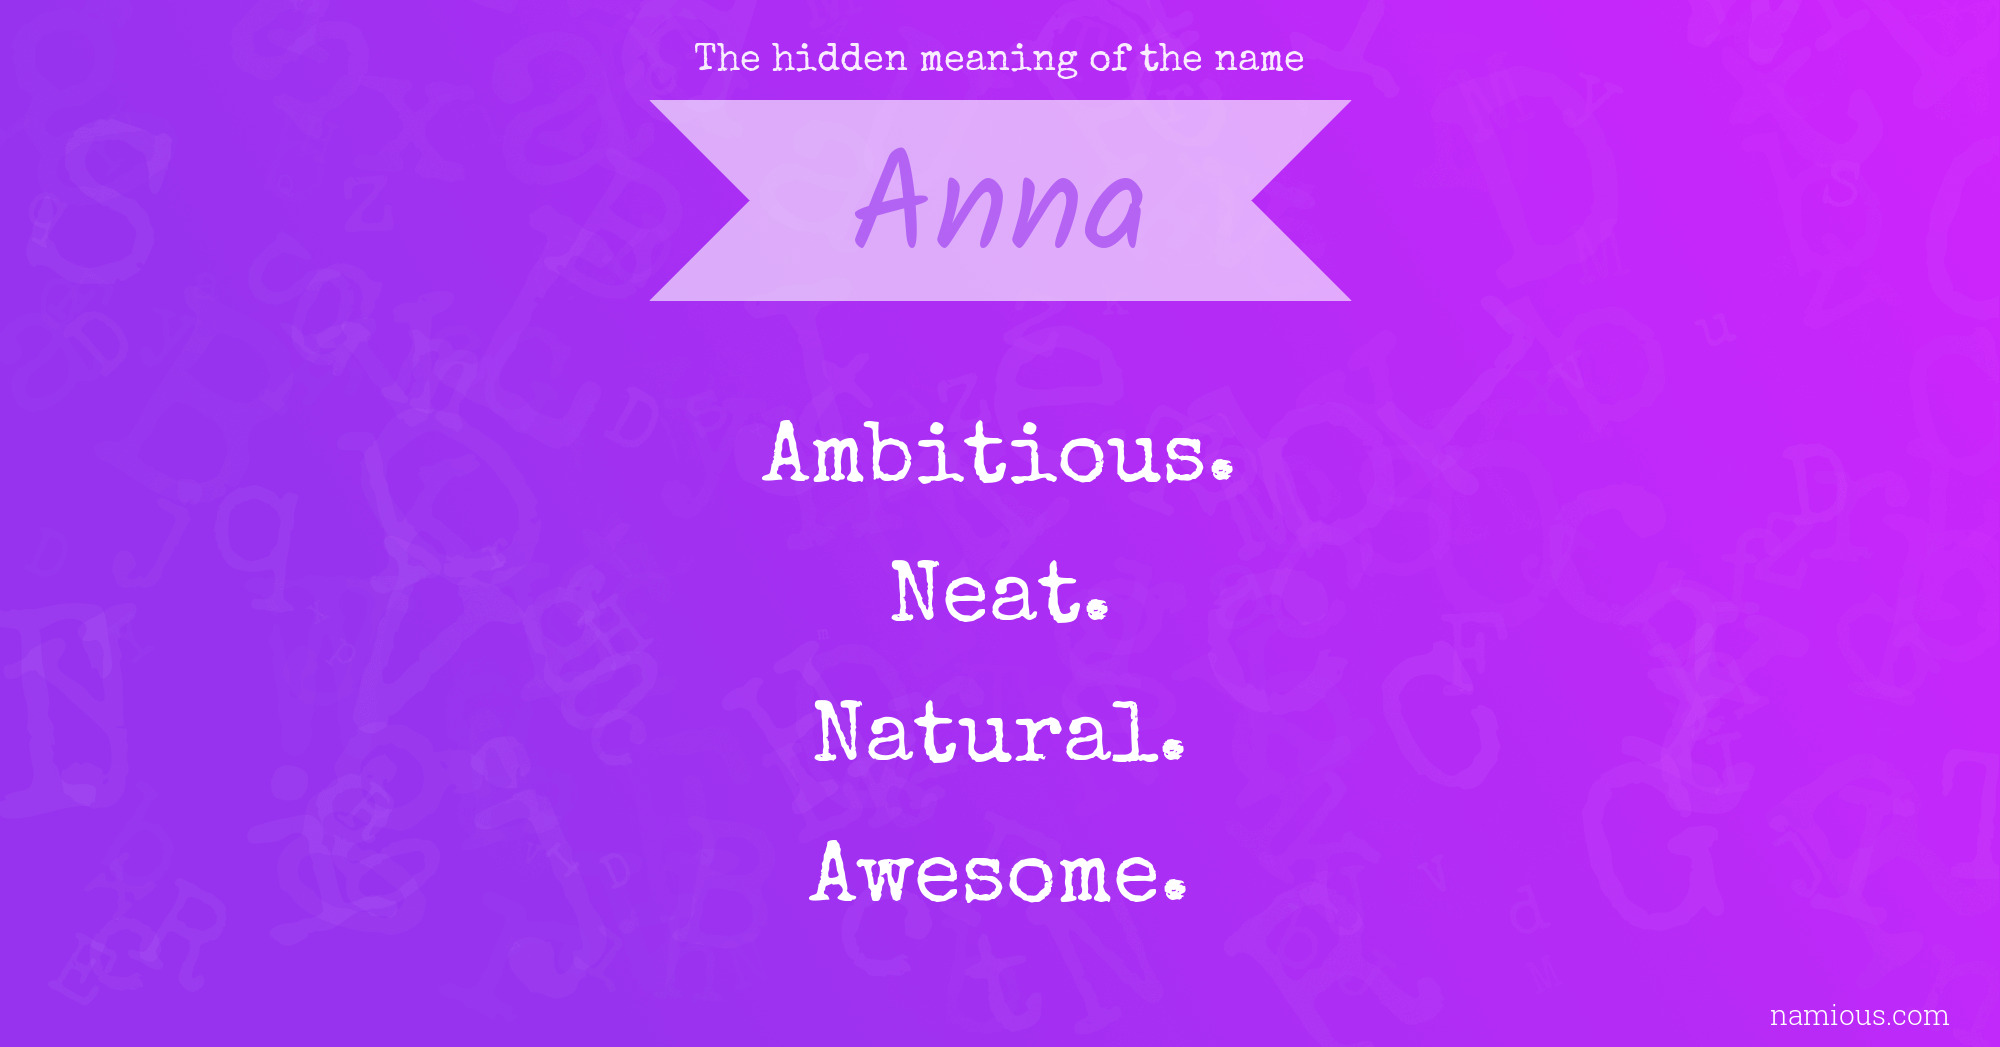 The hidden meaning of the name Anna